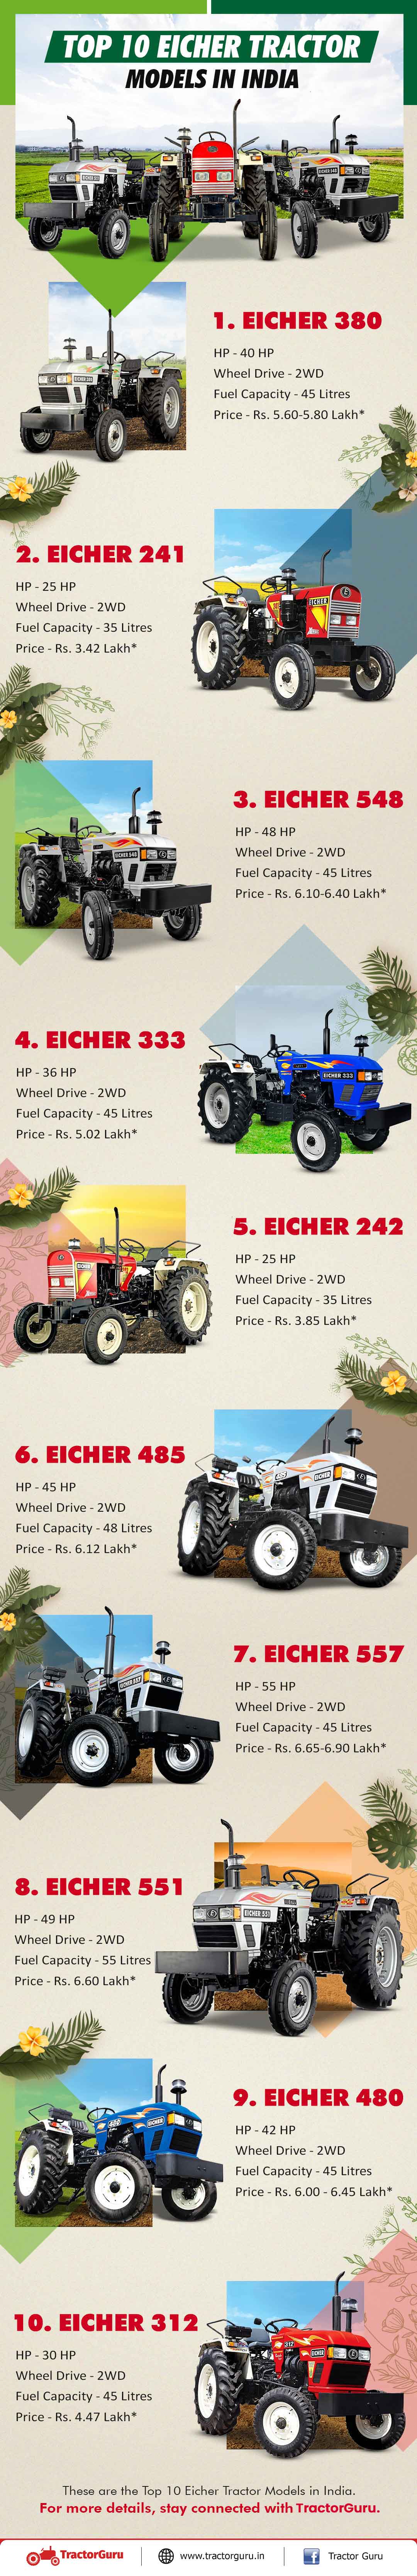 Top 10 eicher tractor models infographic